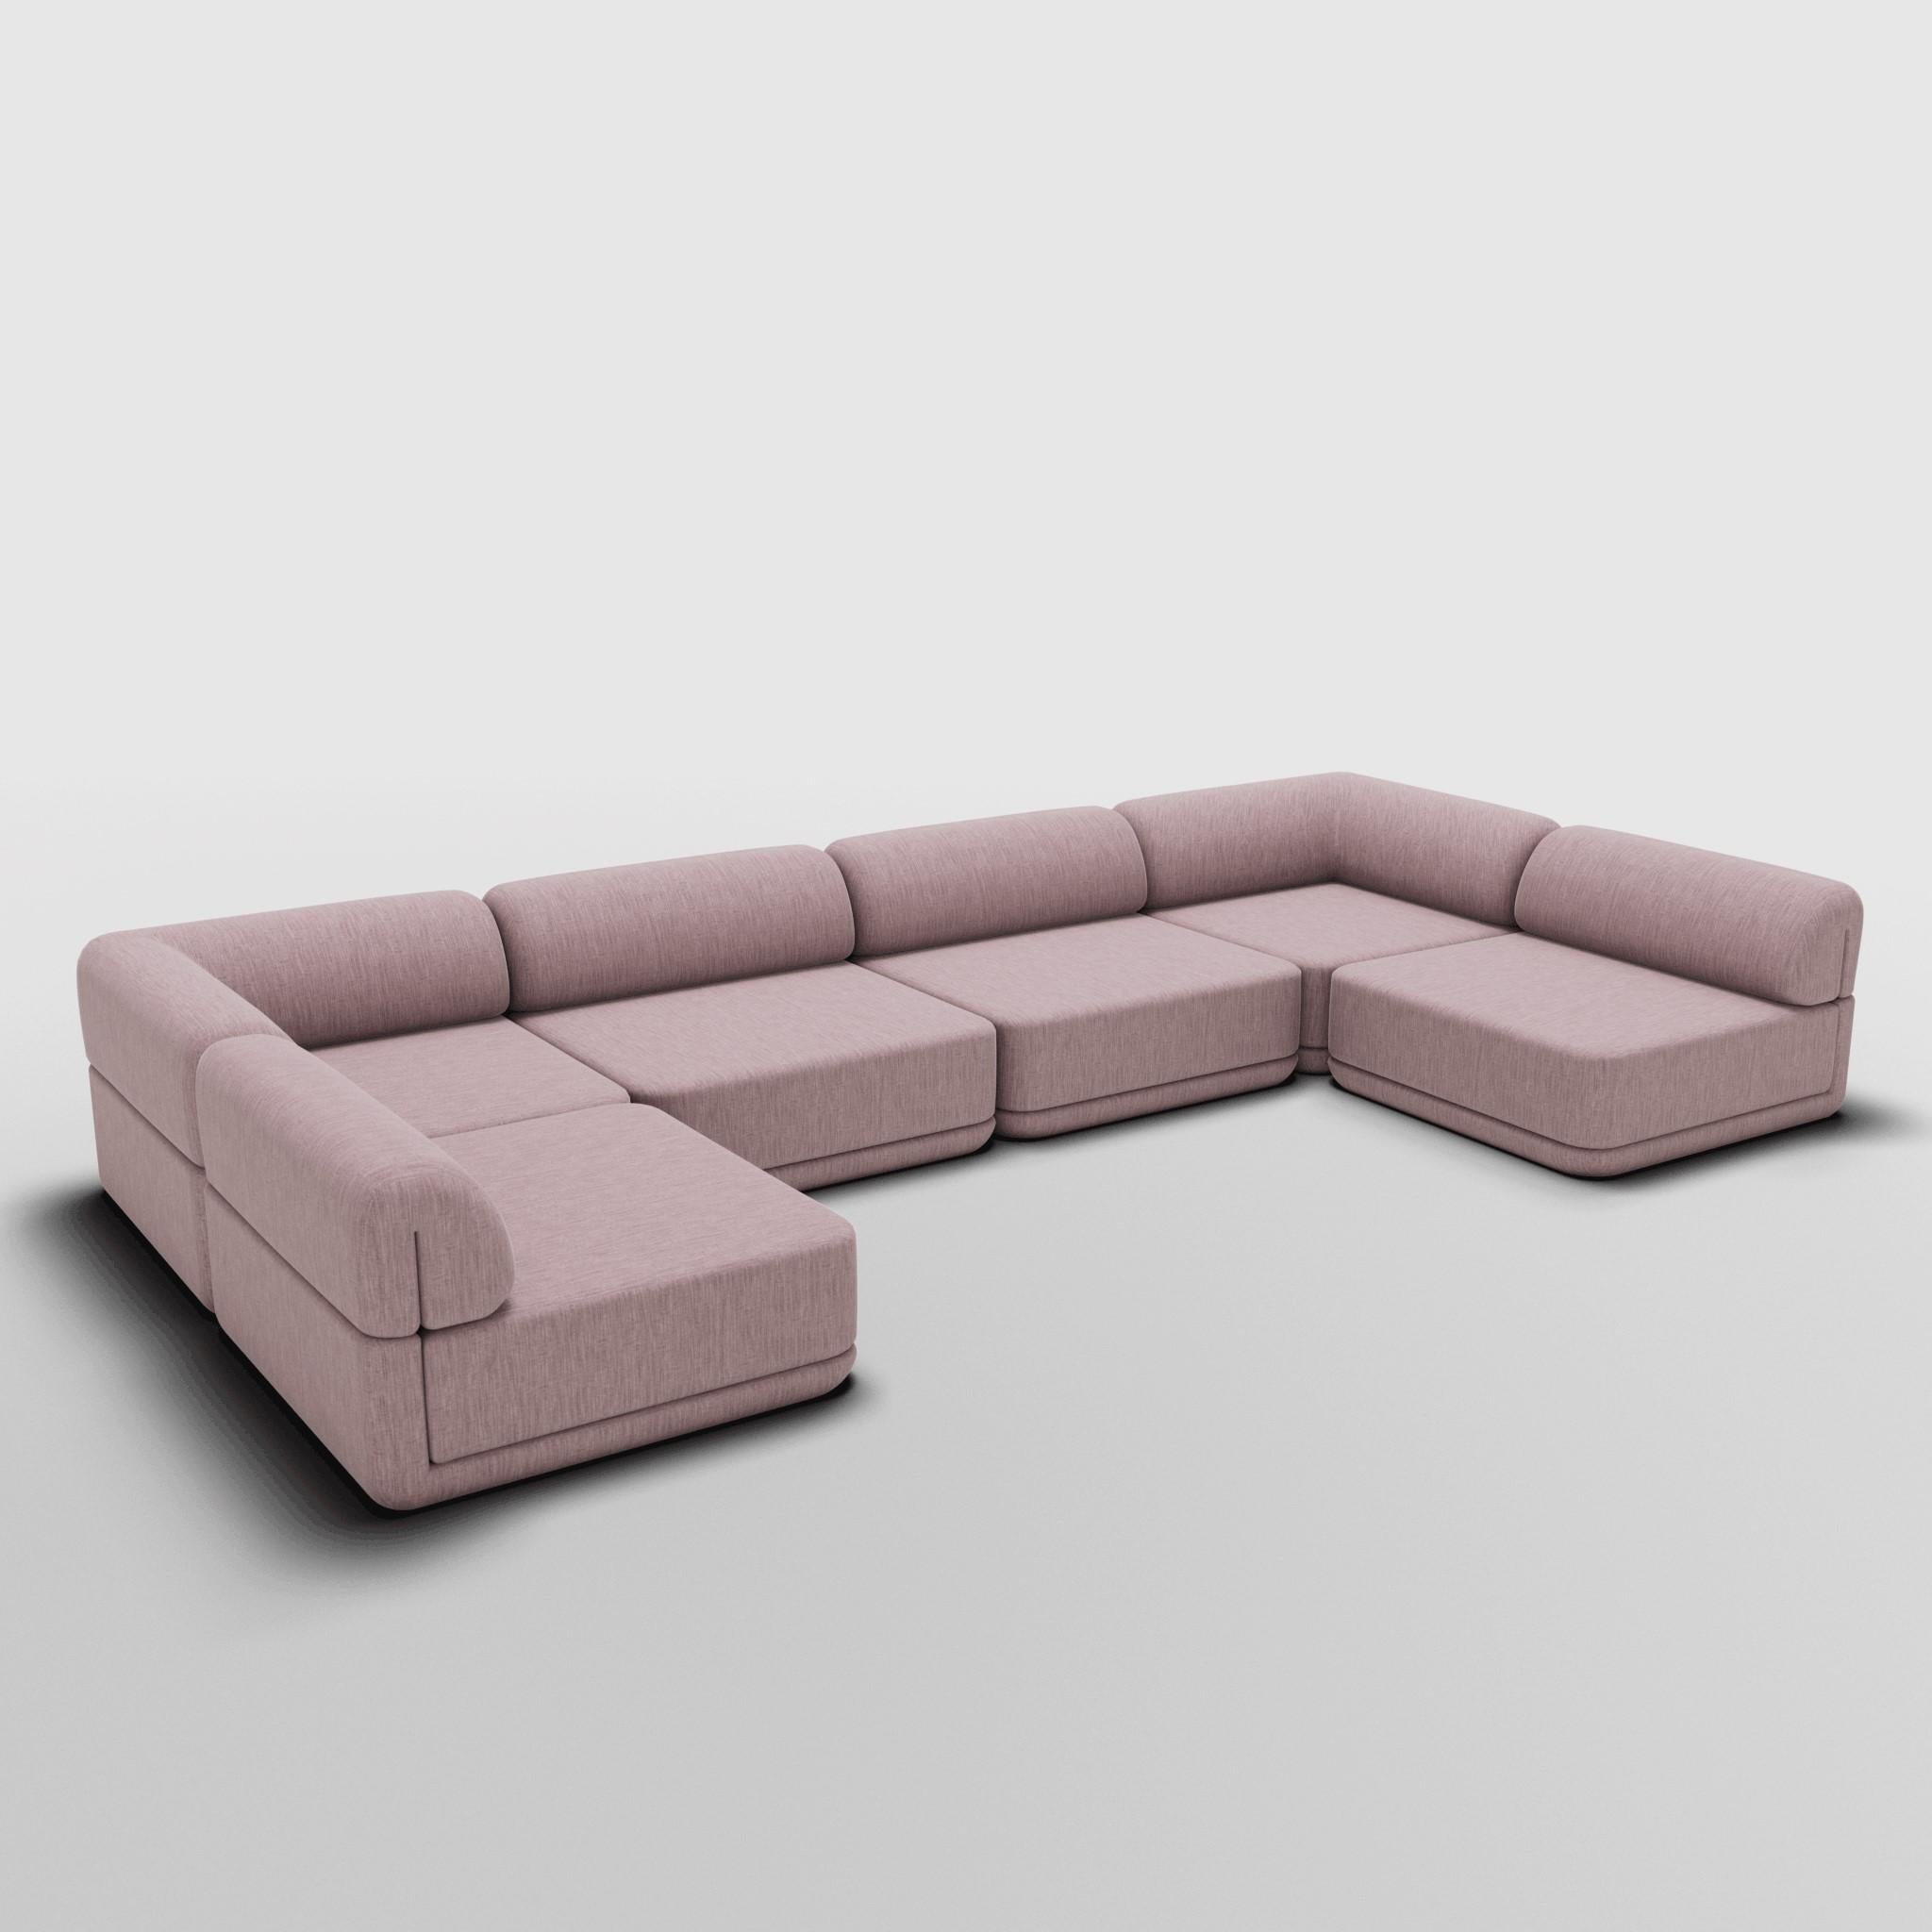 The Cube Sofa - U-Shape Sectional In New Condition For Sale In Ontario, CA